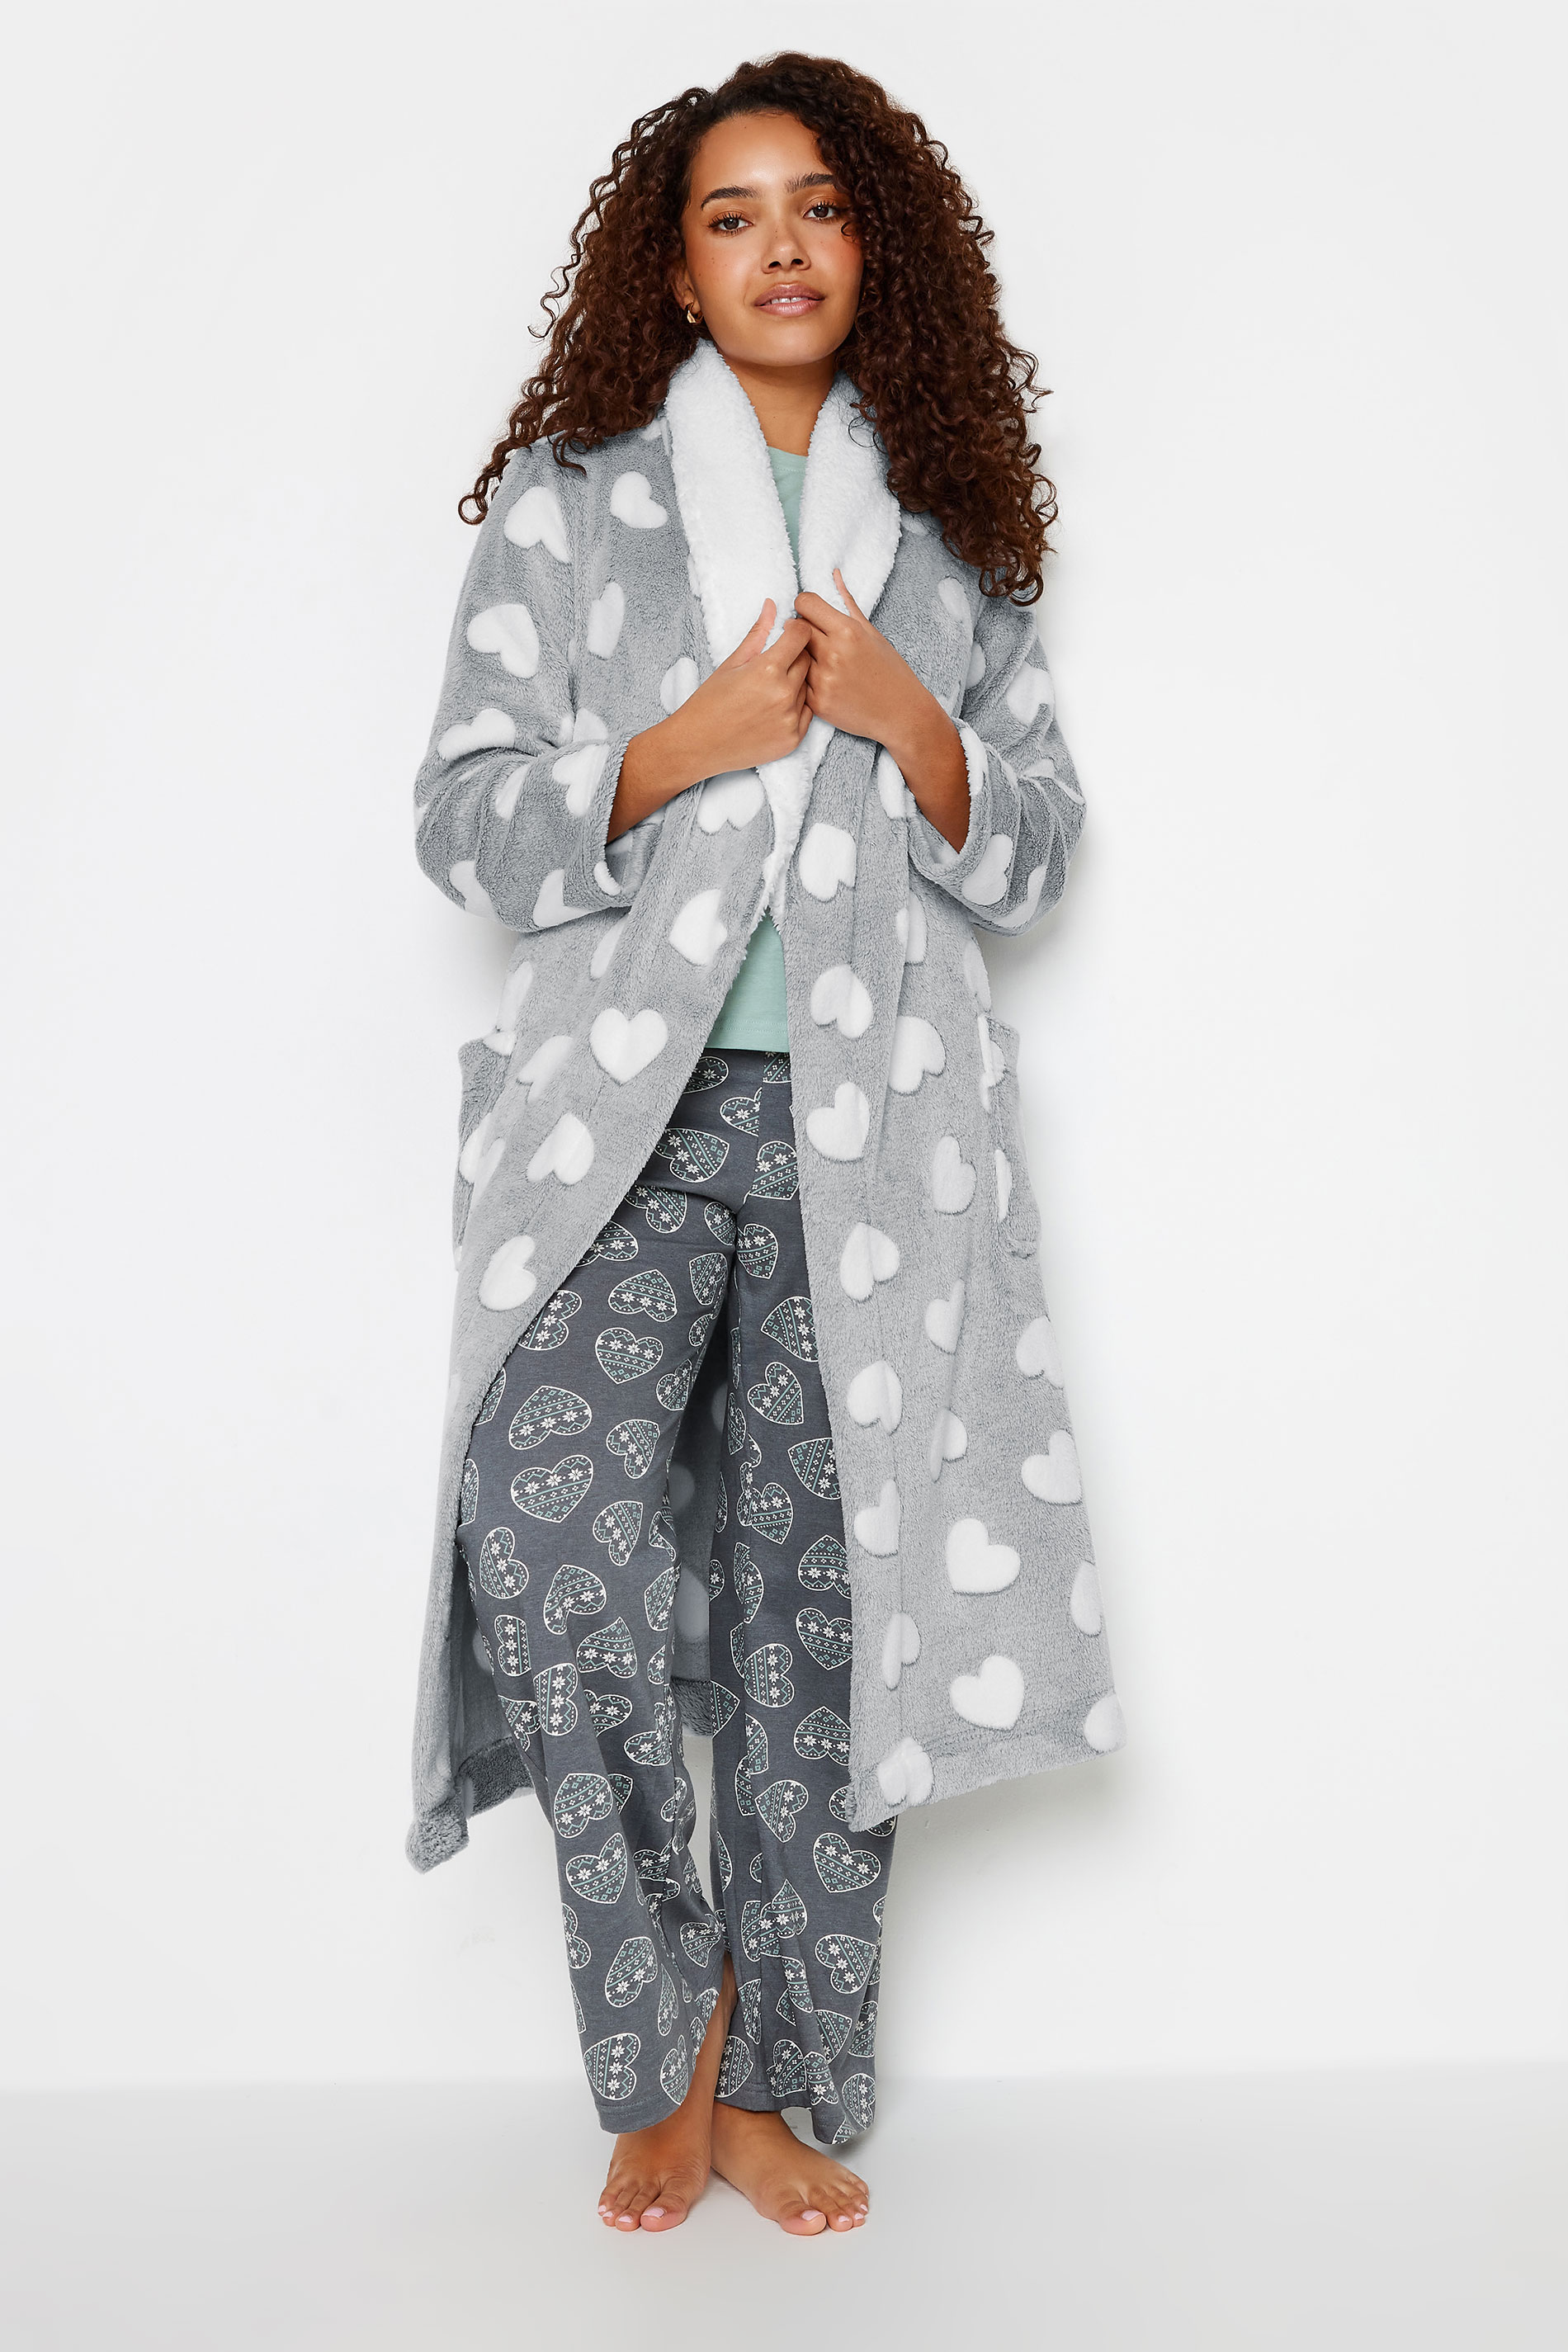 M&Co Grey Soft Touch Heart Print Hooded Dressing Gown | M&Co 2